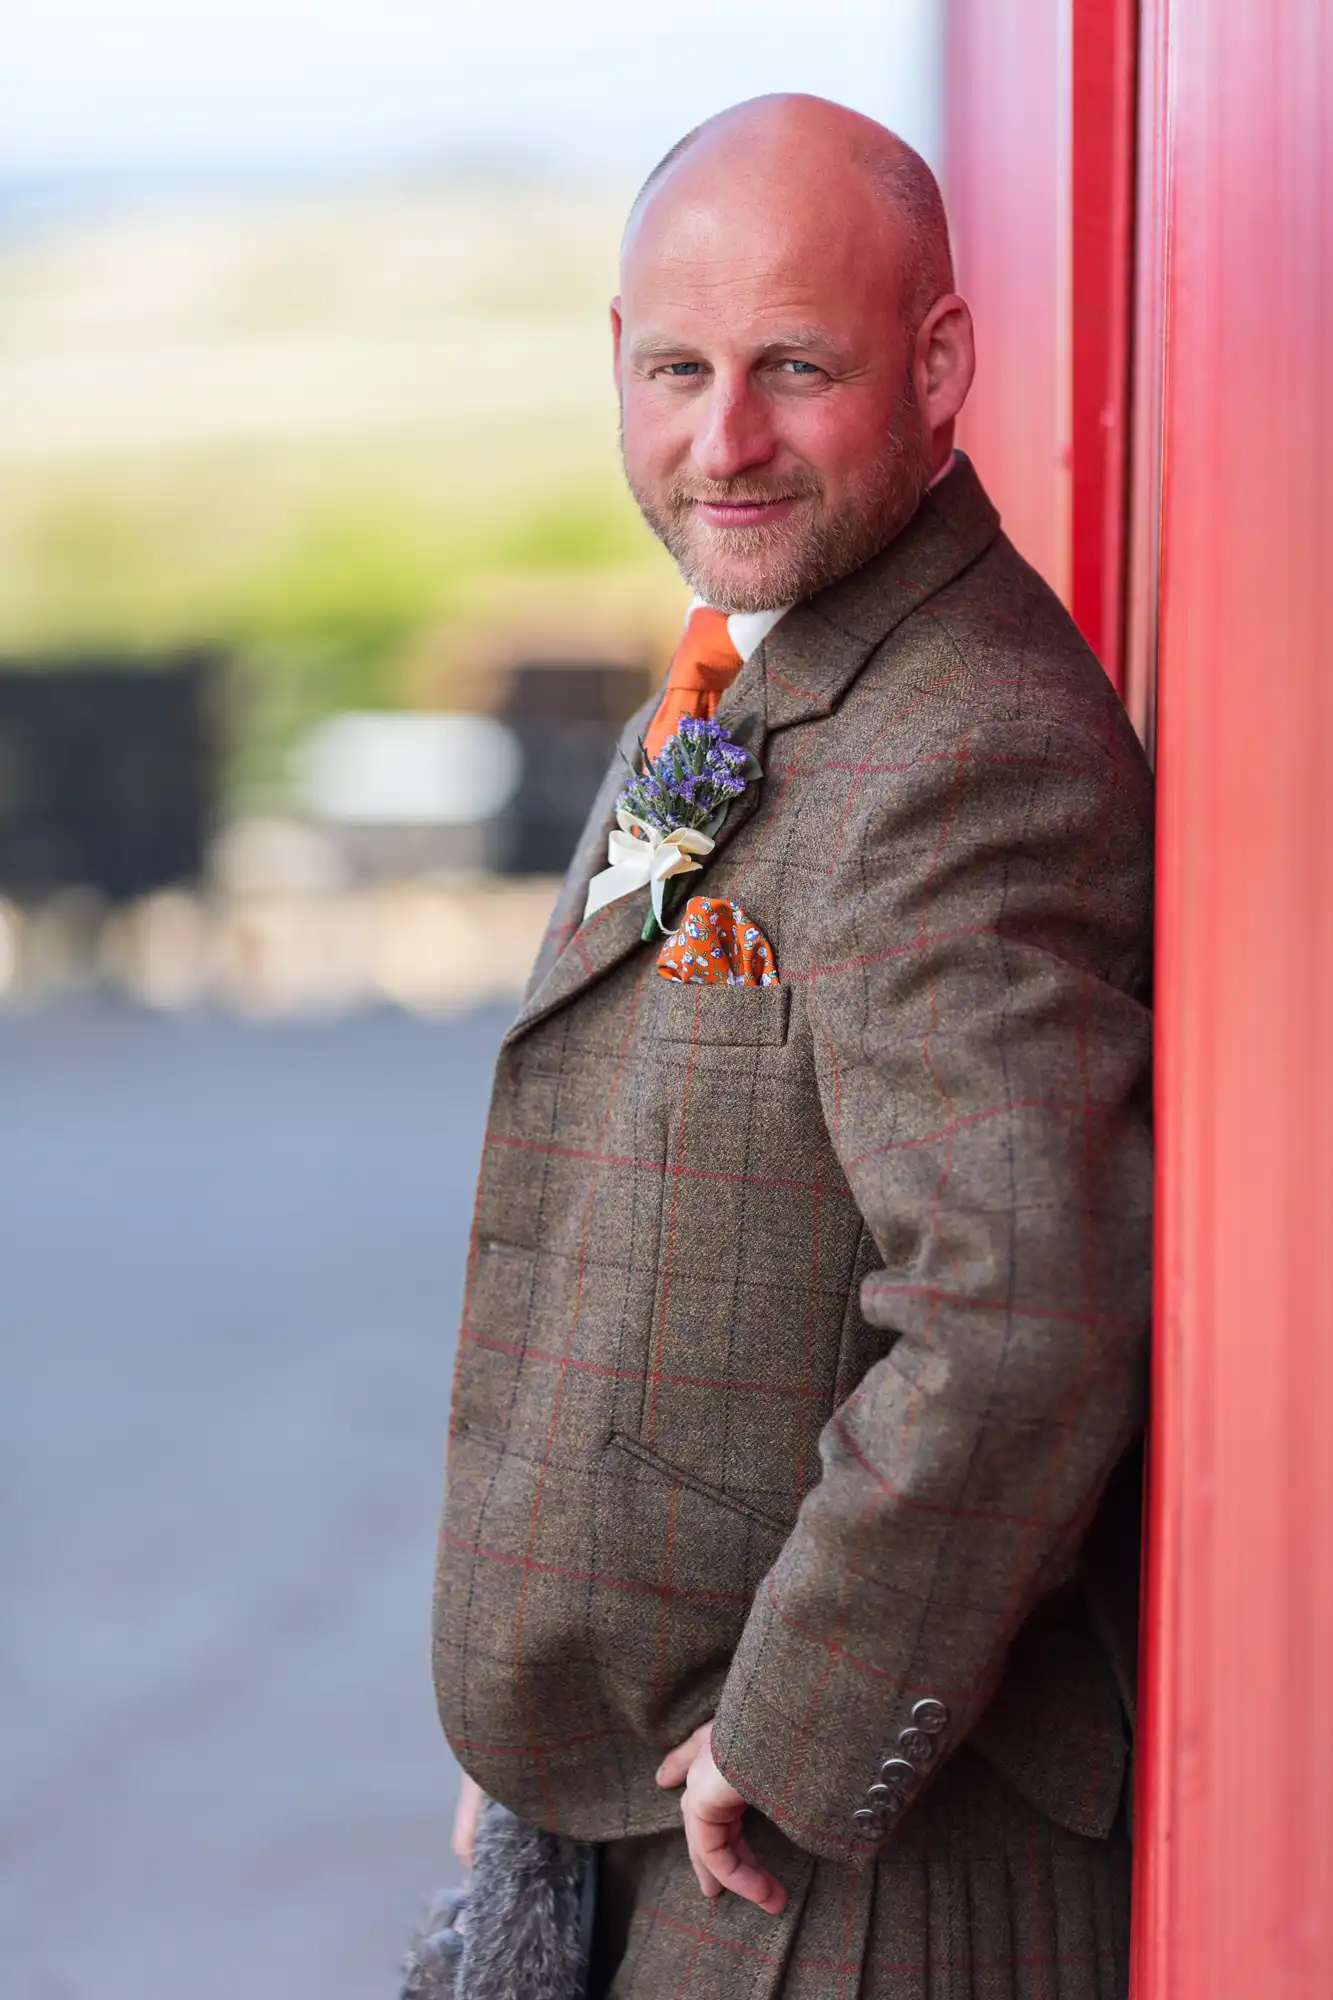 A man in a tweed suit and orange tie leaning against a red door, smiling subtly at the camera.